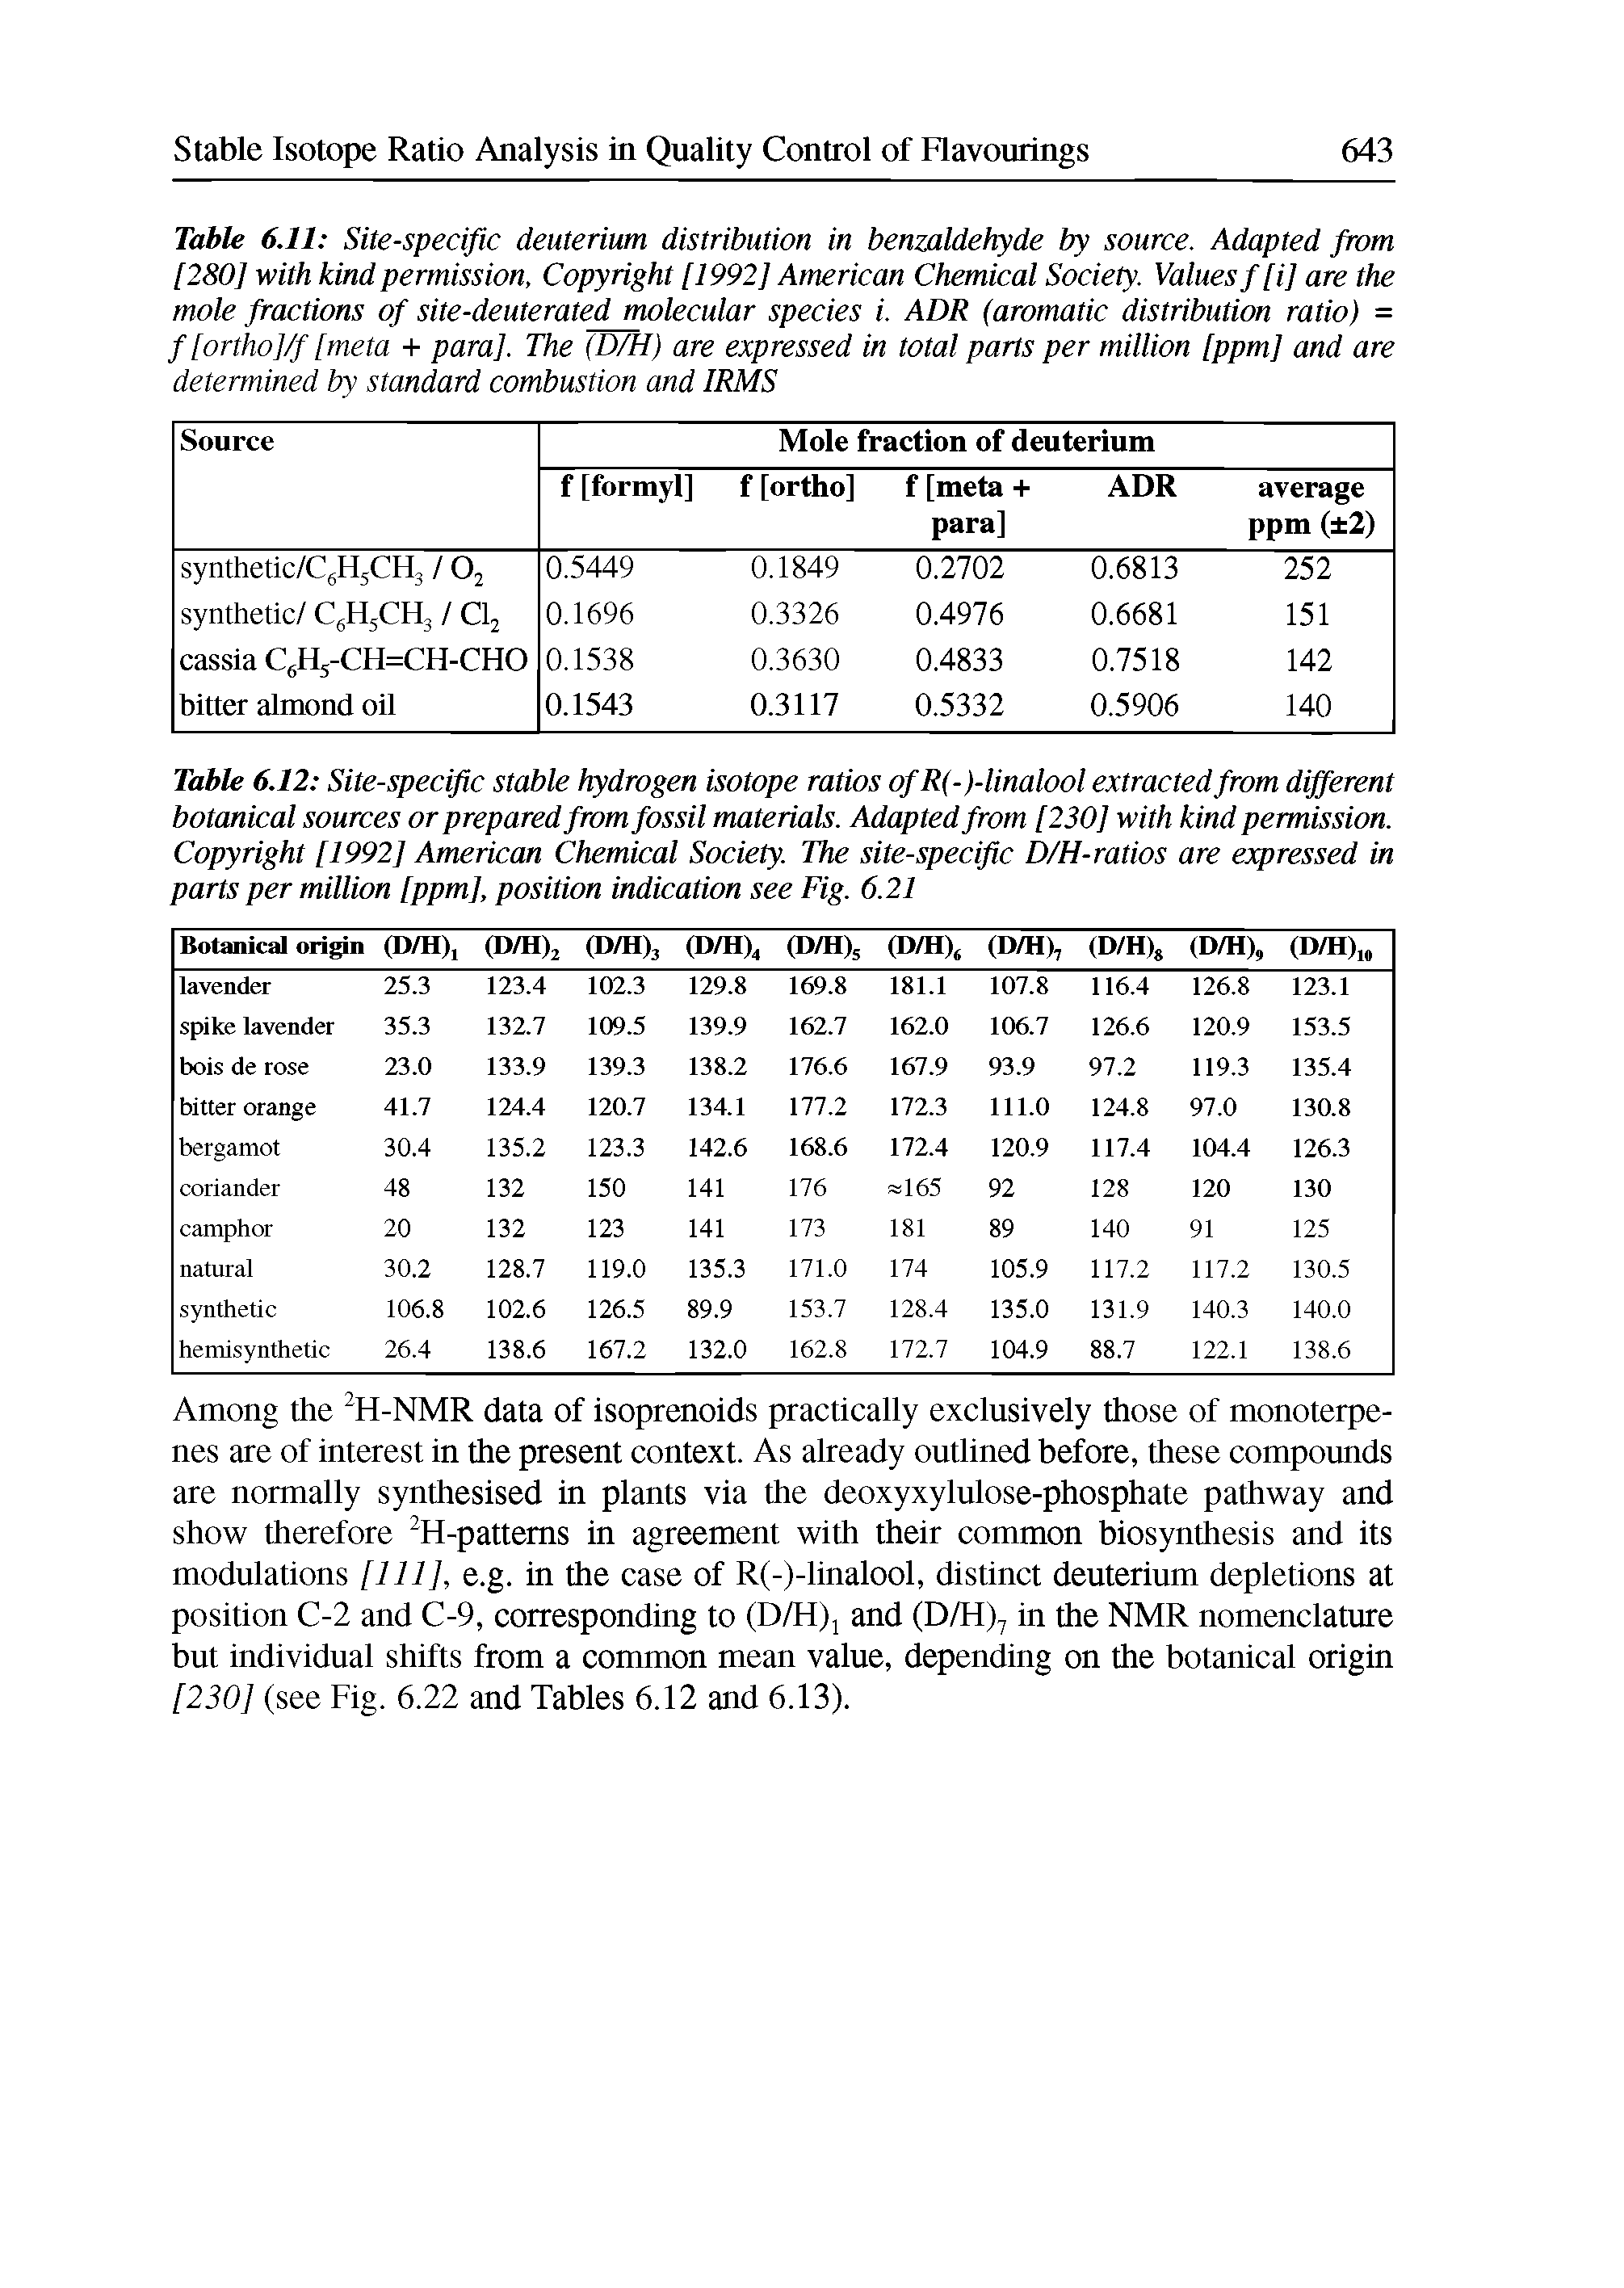 Table 6.11 Site-specific deuterium distribution in benmldehyde by source. Adapted from [280] with kind permission, Copyright [1992] American Chemical Society. Values f[i] are the mole fractions of site-deuterated molecular species i. ADR (aromatic distribution ratio) = f ]ortho]/f ]meta + para]. The (D/H) are expressed in total parts per million [ppm] and are determined by standard combustion and IRMS...